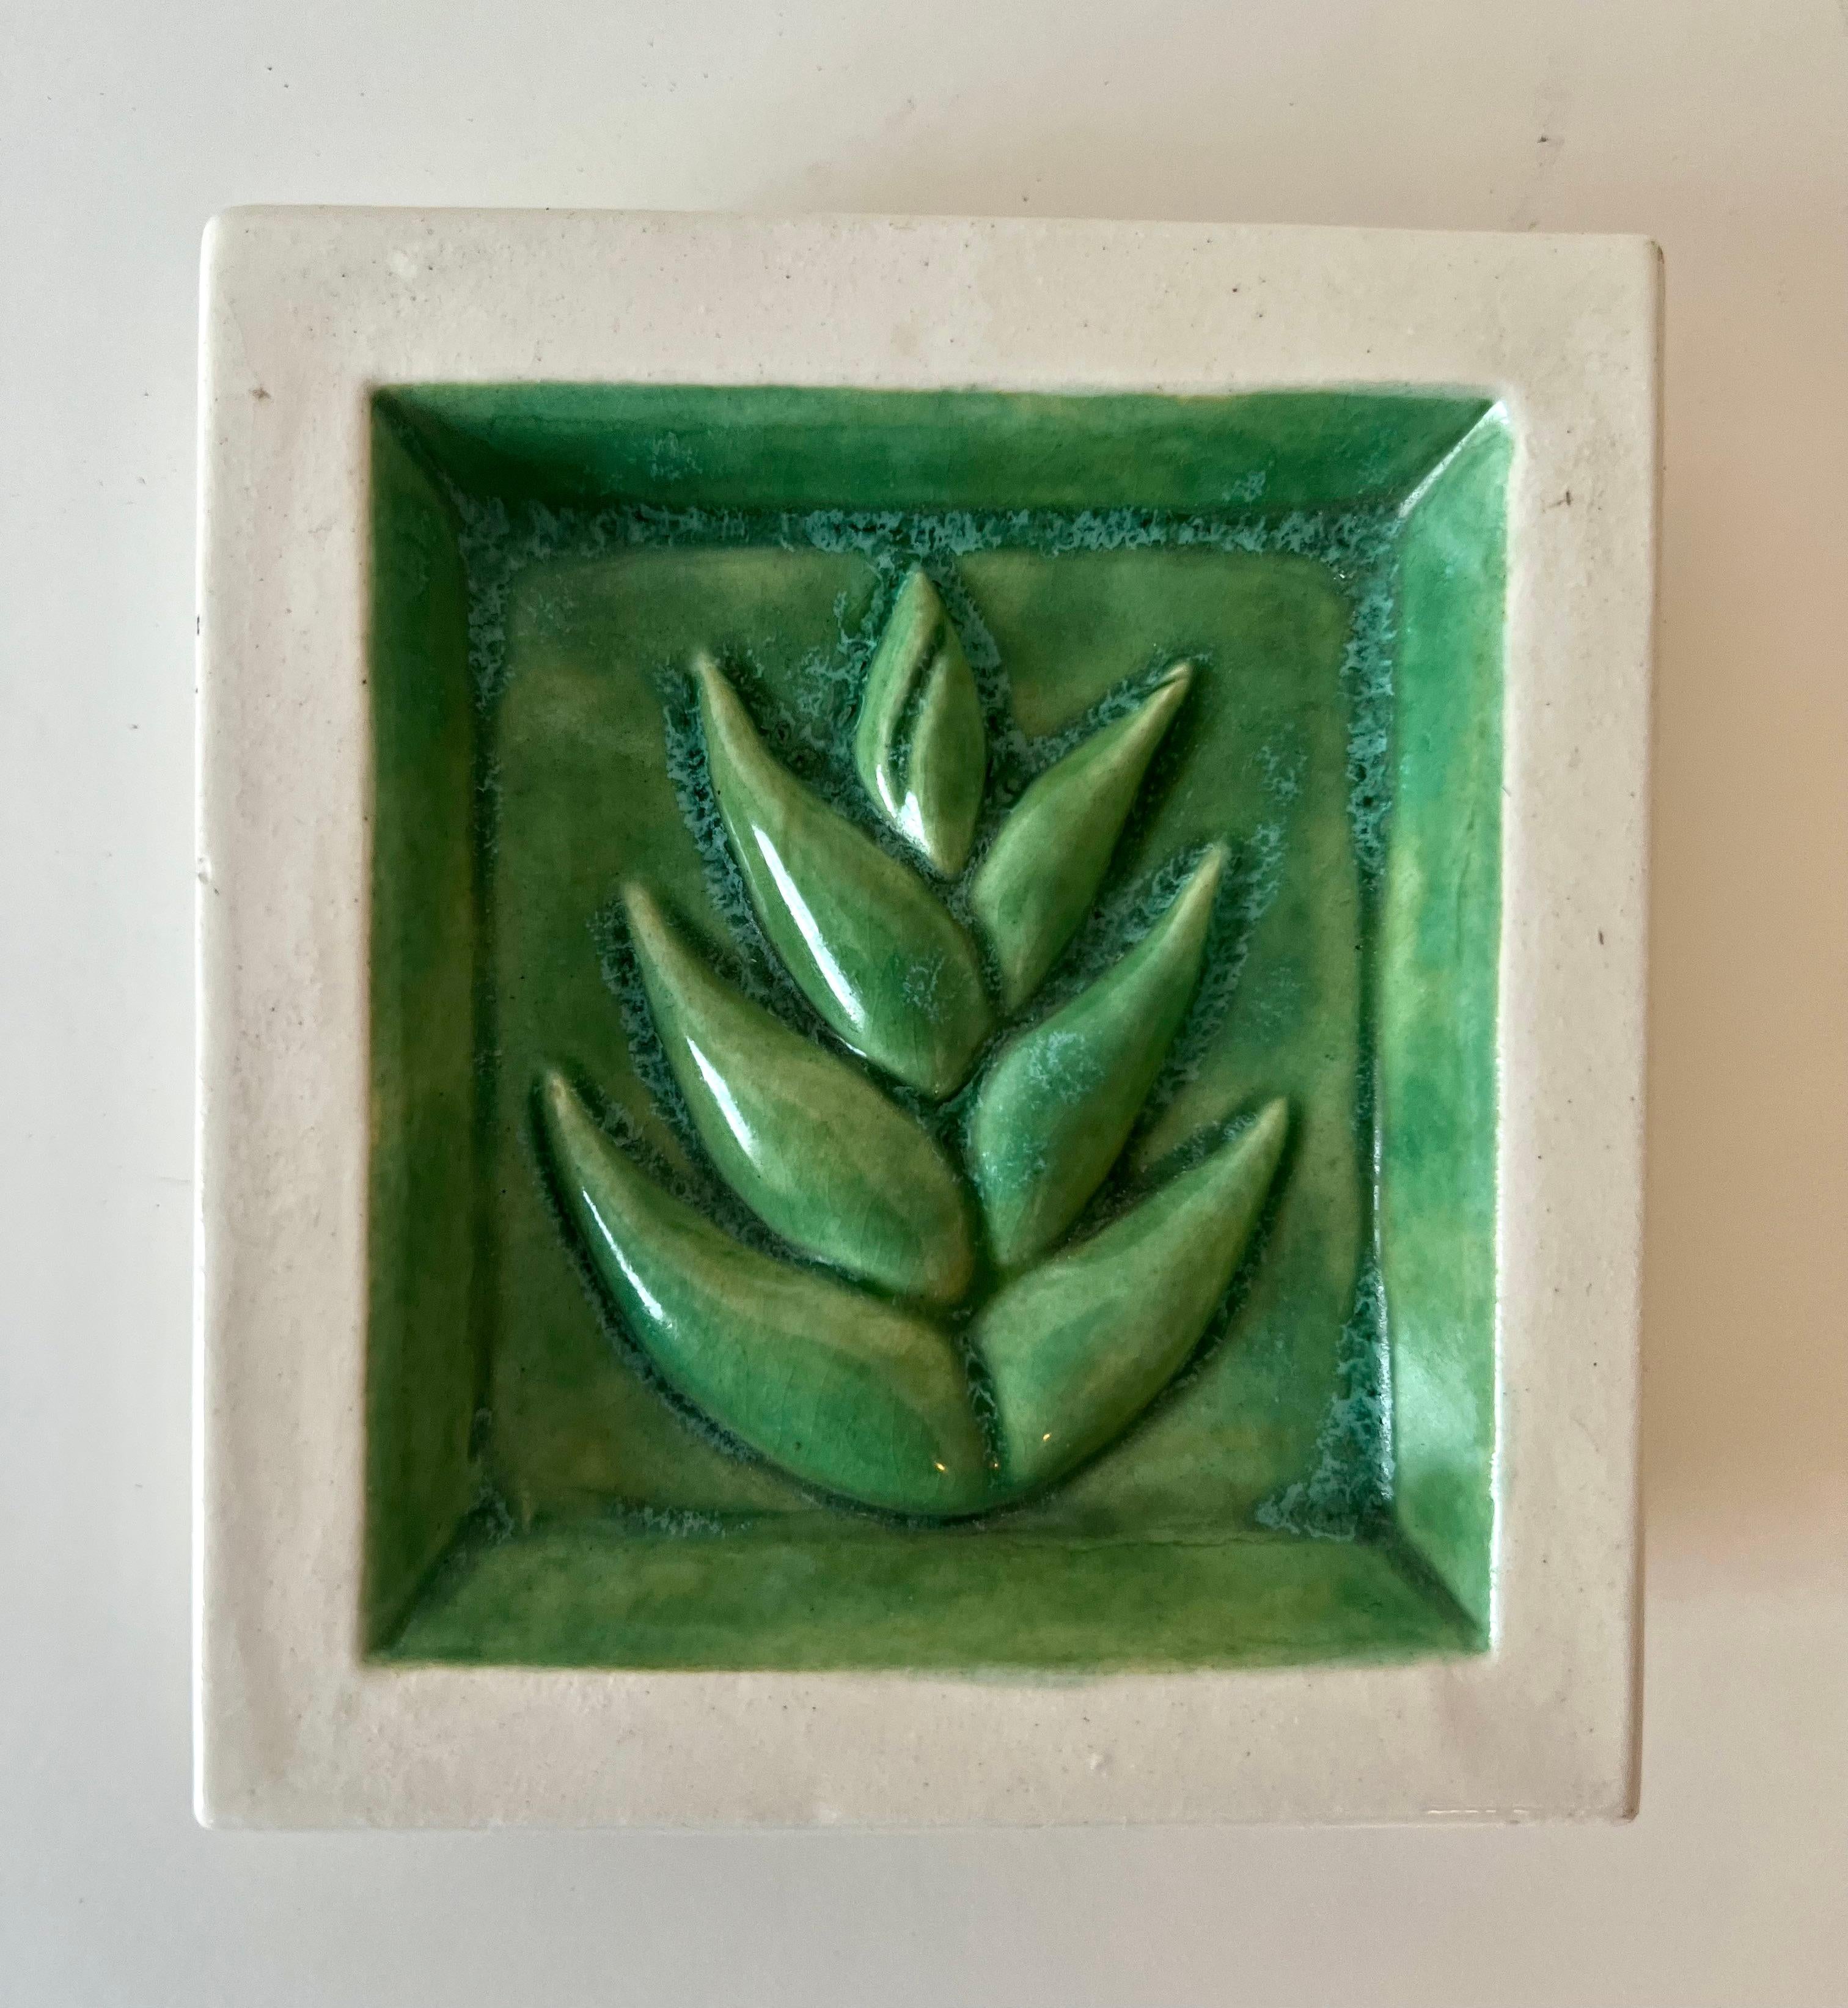 A small Terracotta Tile with a green leaf. The tile has enough relief to actually hold paper clips or small candies, but likely would be used for decorative purposes.